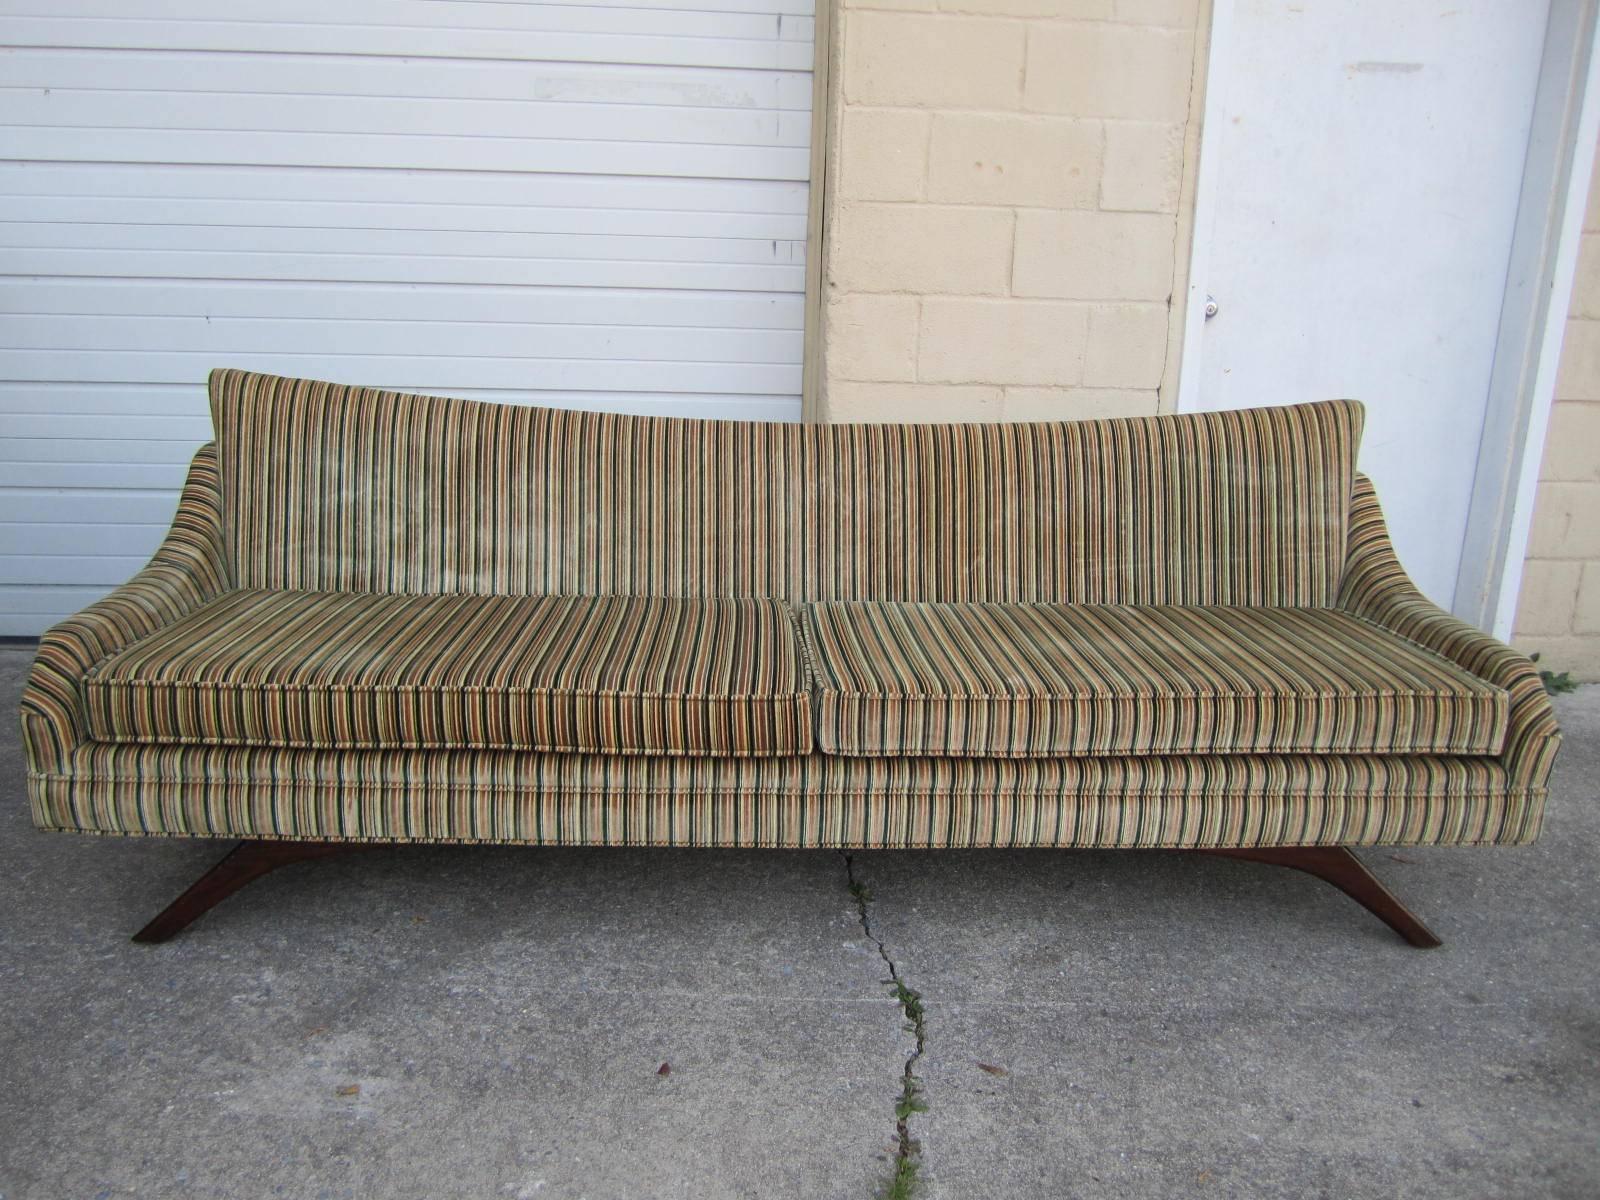 Wonderful sofa with magnificent splayed walnut legs. We love everything about this sofa from its winged back and swooped arms to its original striped velvet upholstery. Just look at it from the back-just stunning. This is one of those amazing pieces